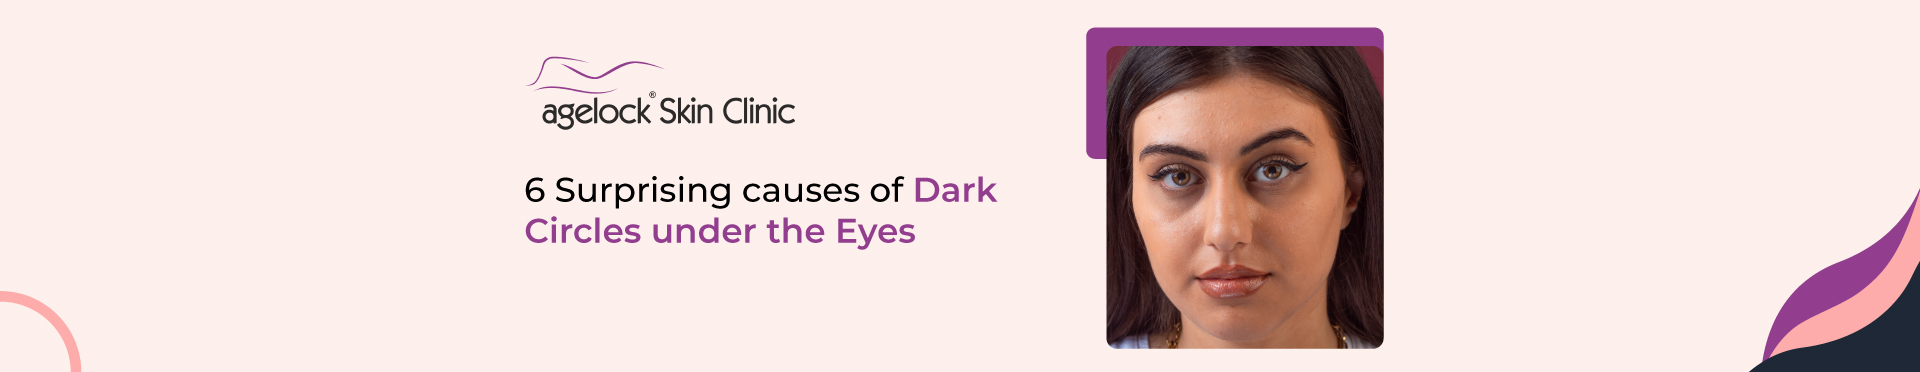 <strong>6 surprising causes of dark circles under the eyes</strong>